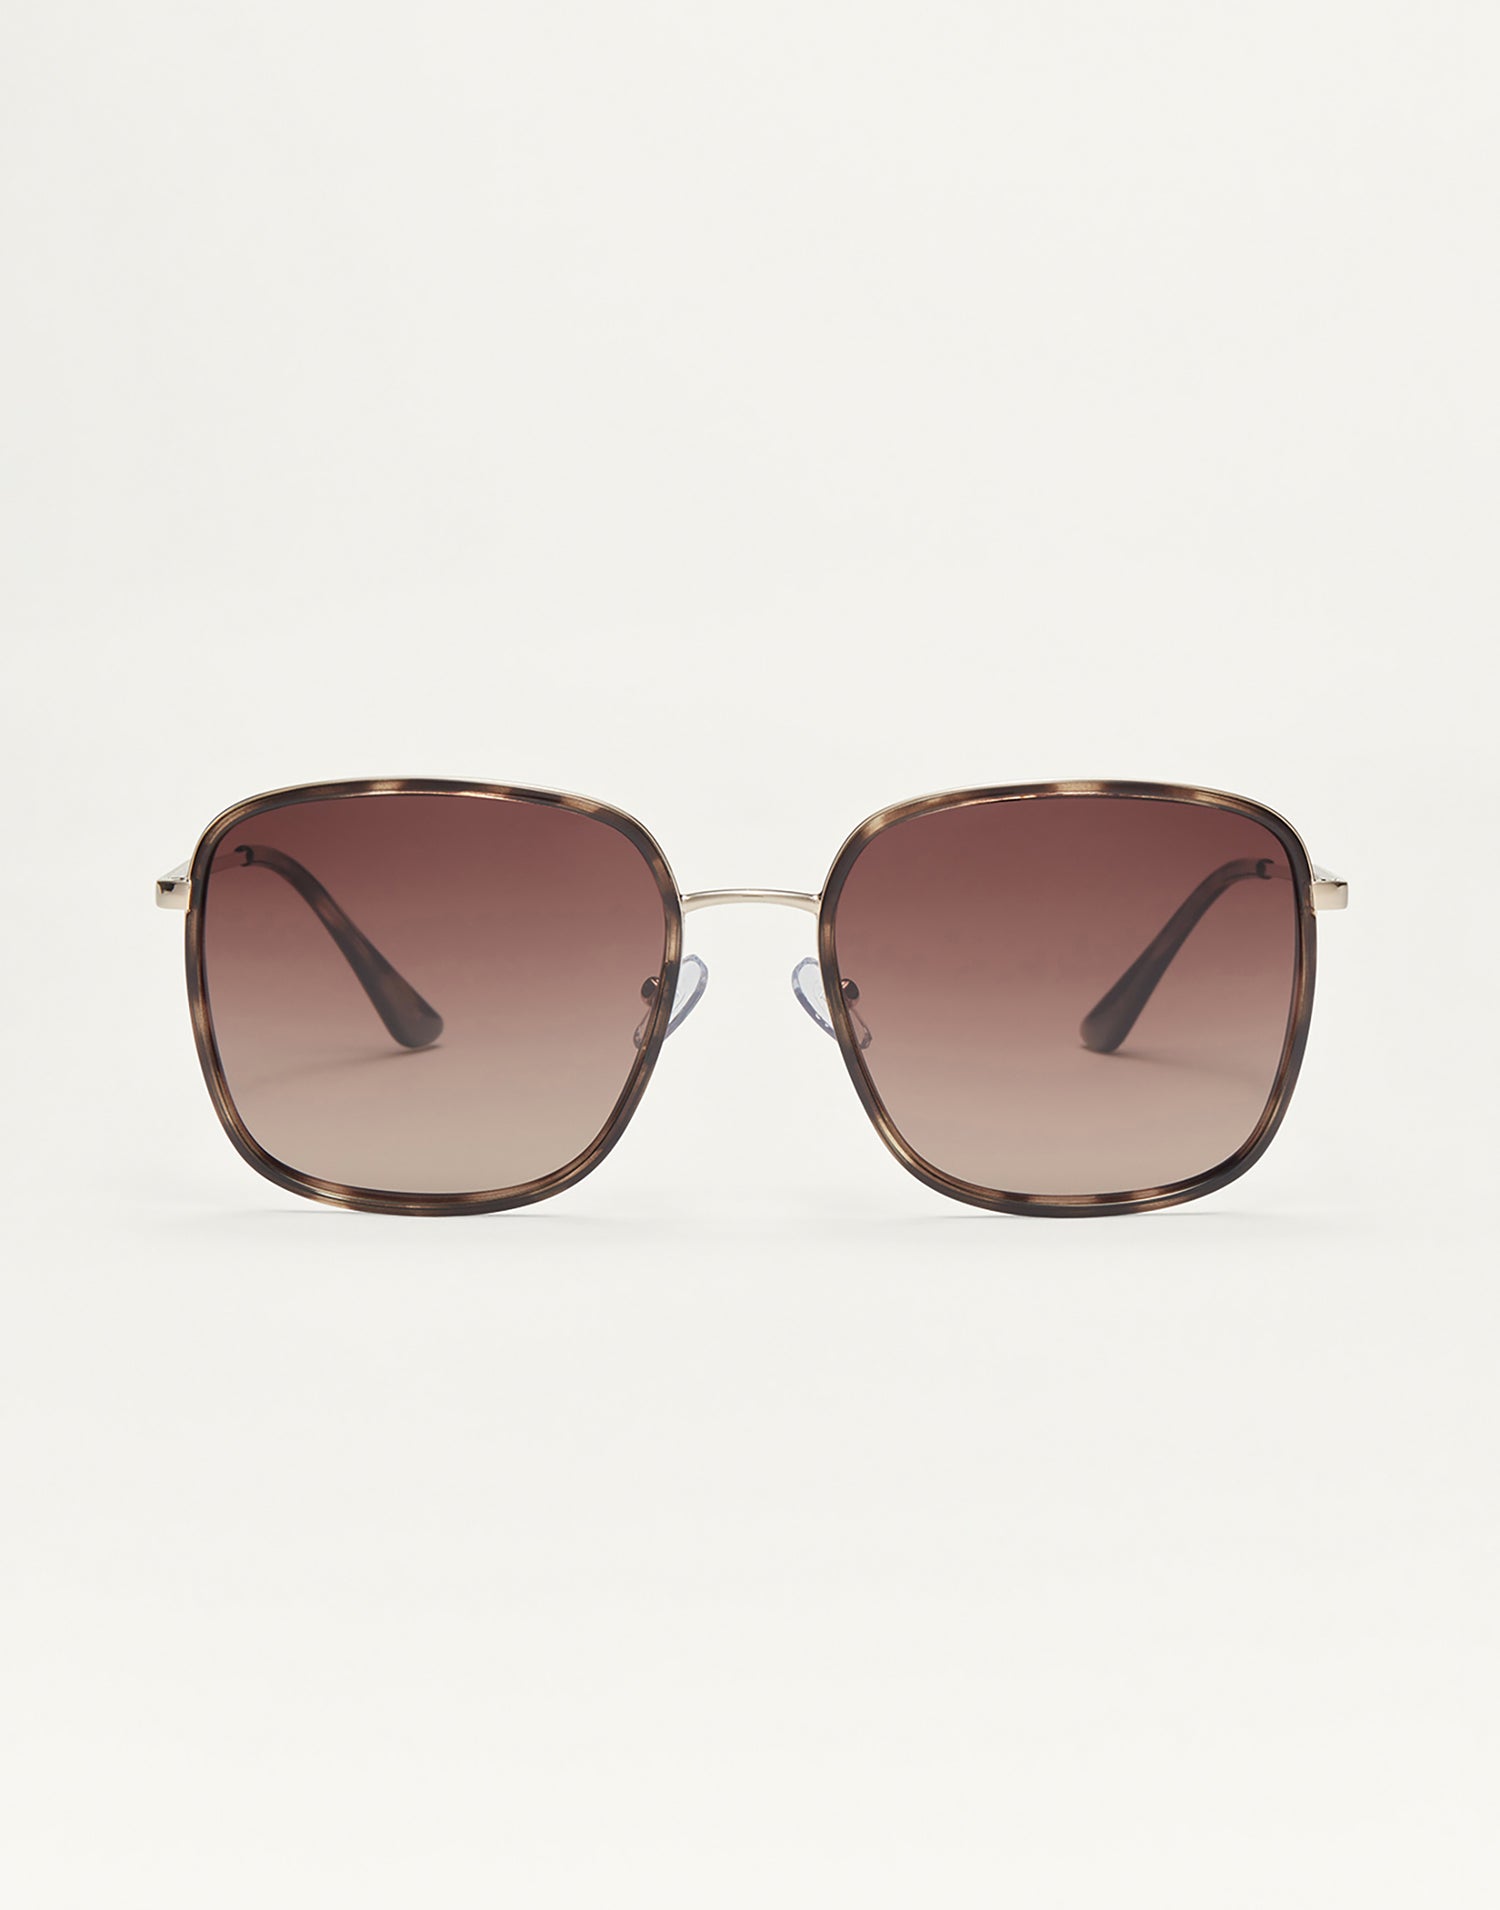 Escape Sunglasses by Z Supply in Brown Tortoise - Front View